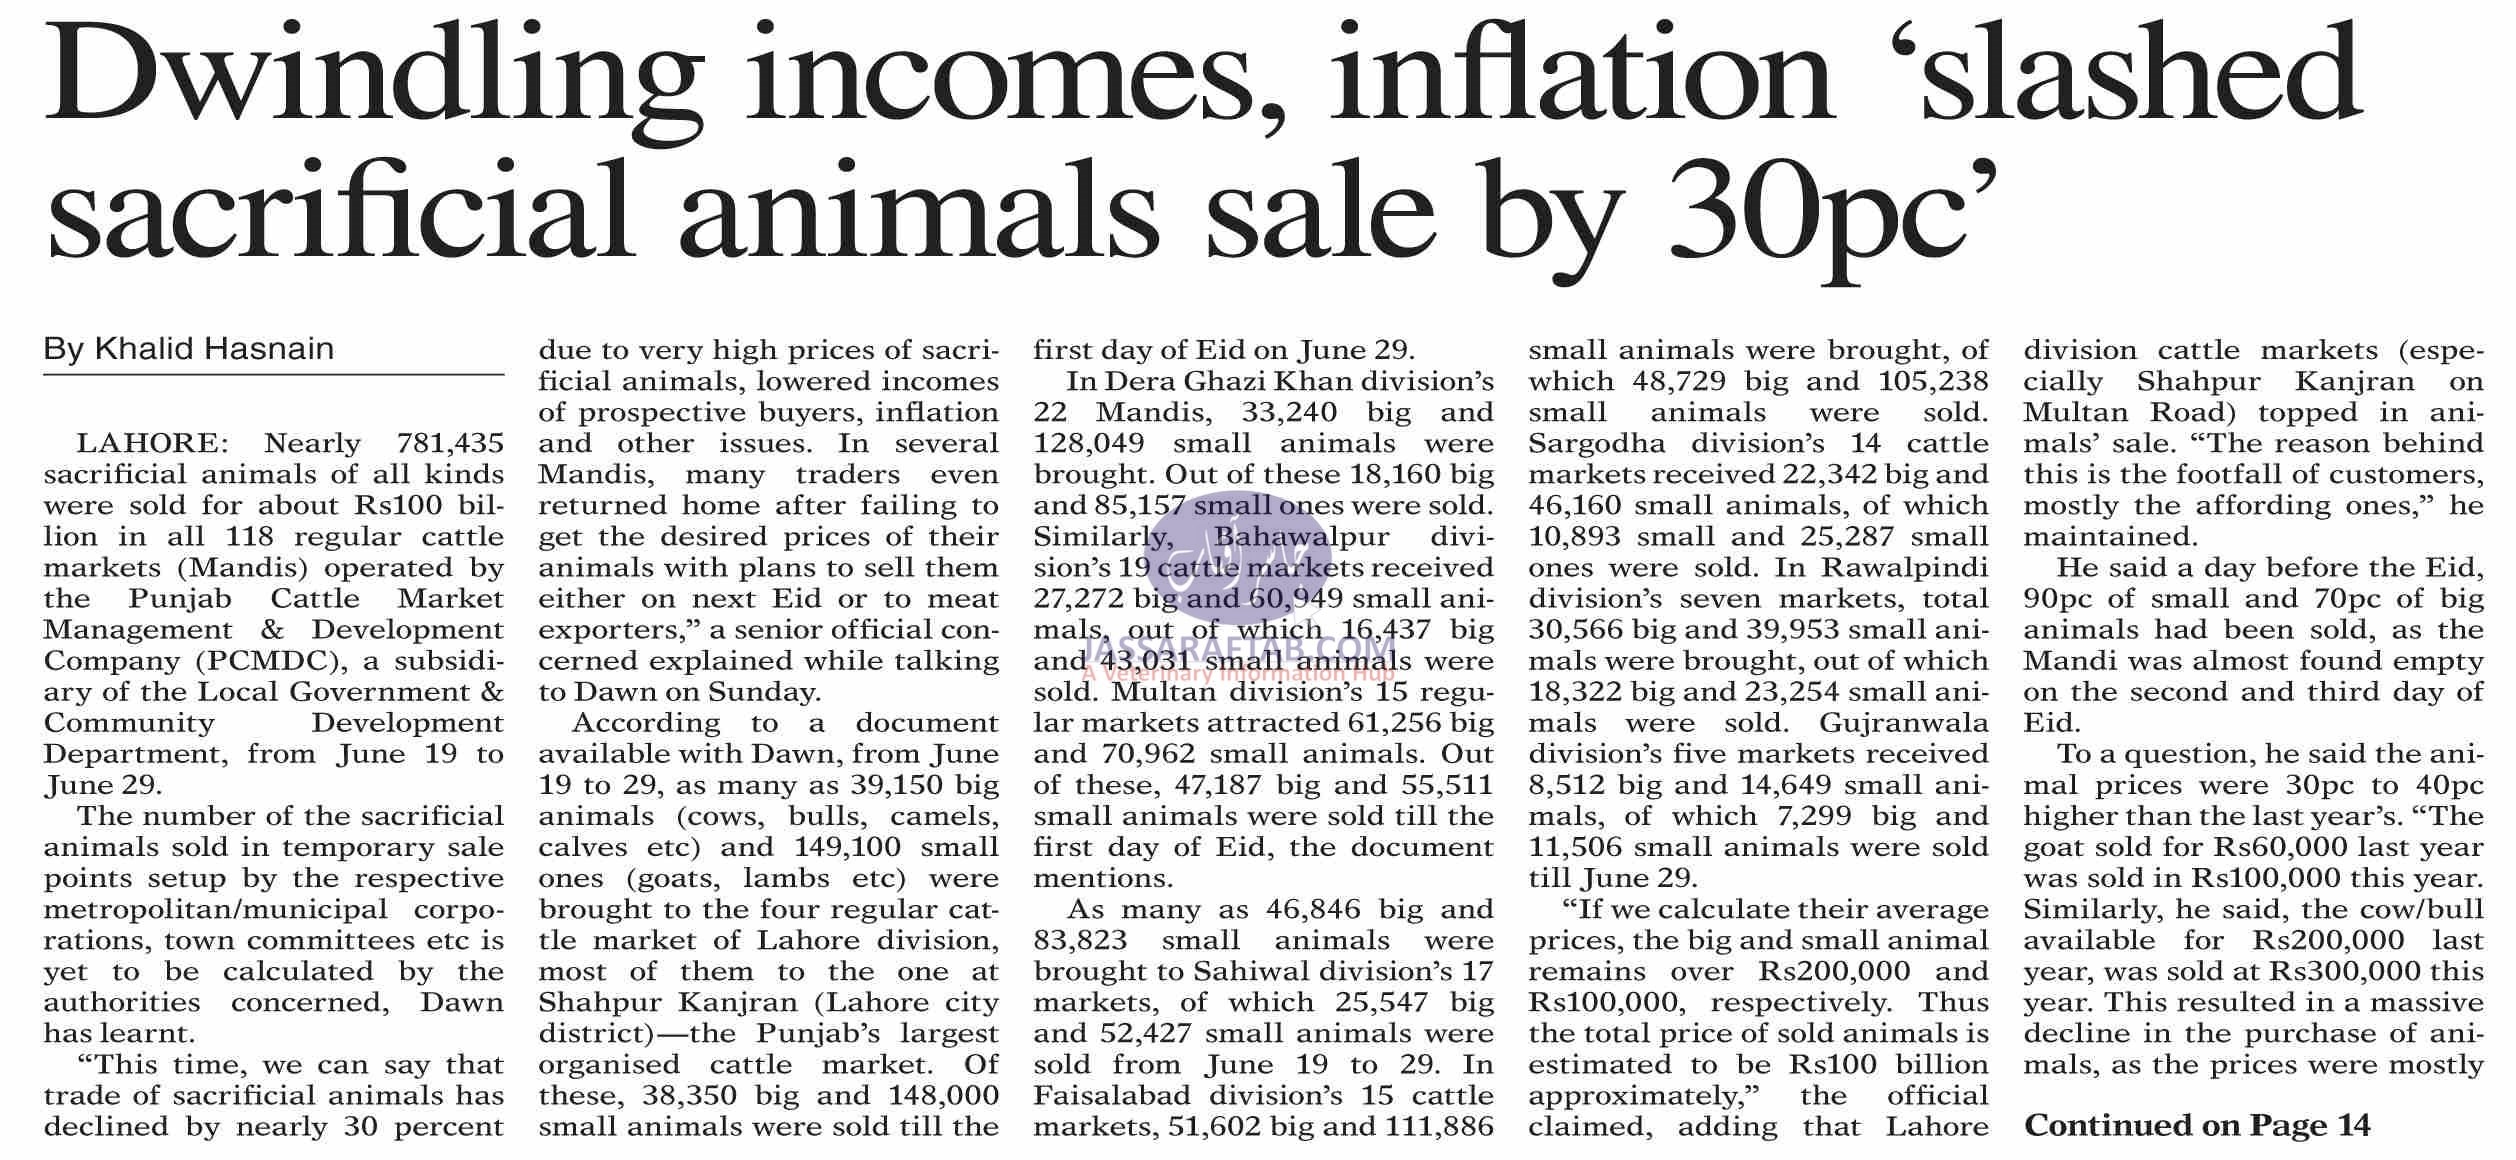 Sale of sacrifcial animals declined by 30 percent